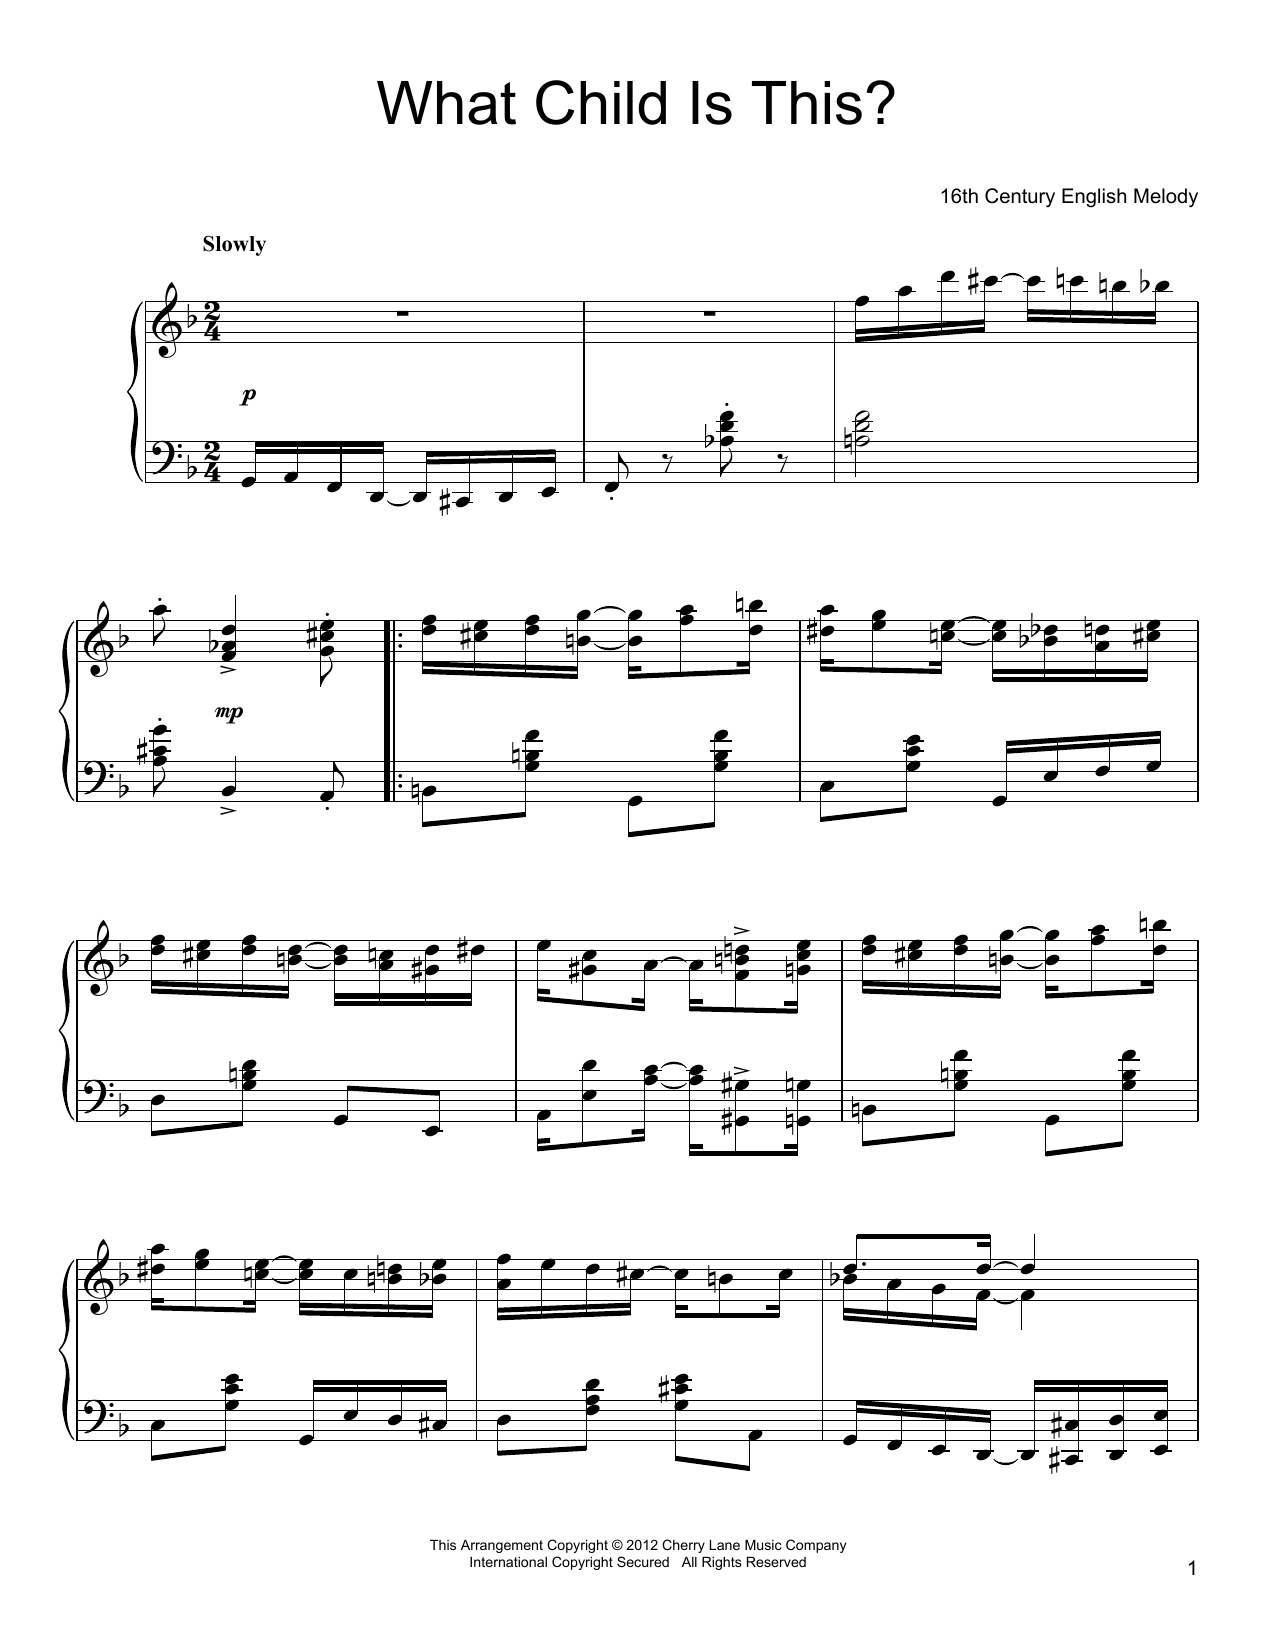 What Child Is This? sheet music